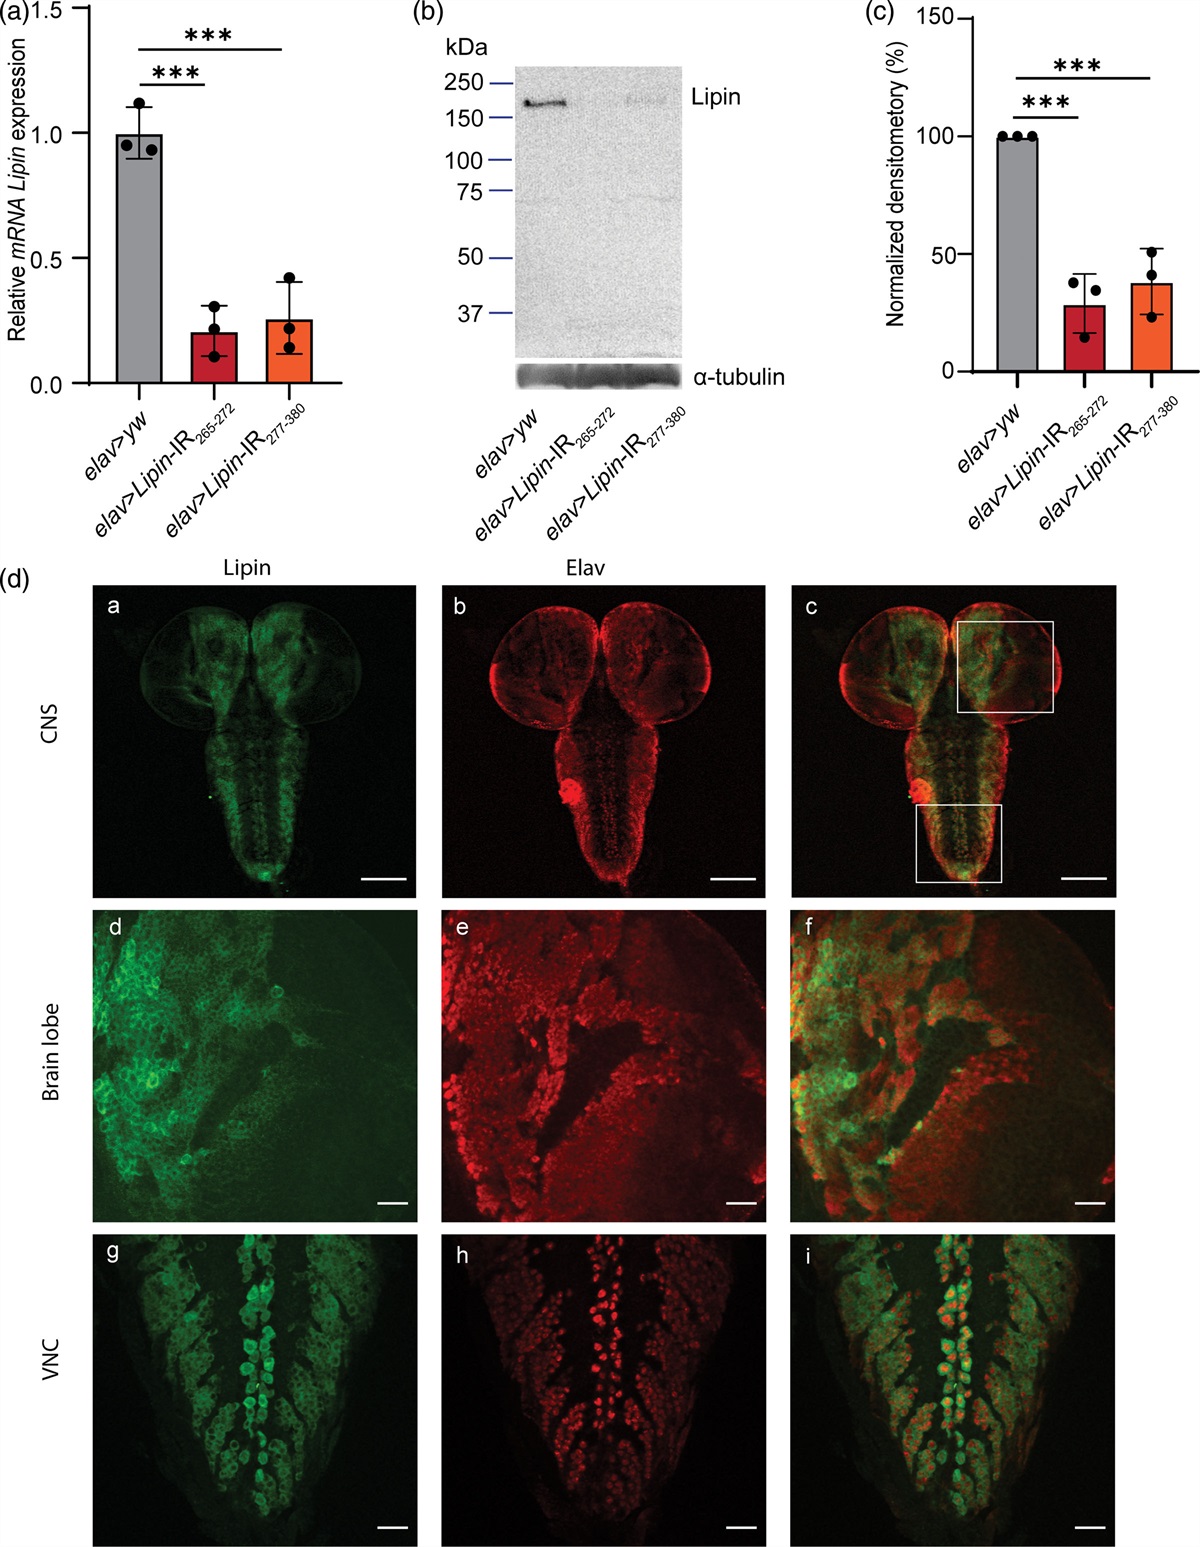 Lipin knockdown in pan-neuron of Drosophila induces reduction of lifespan, deficient locomotive behavior, and abnormal morphology of motor neuron